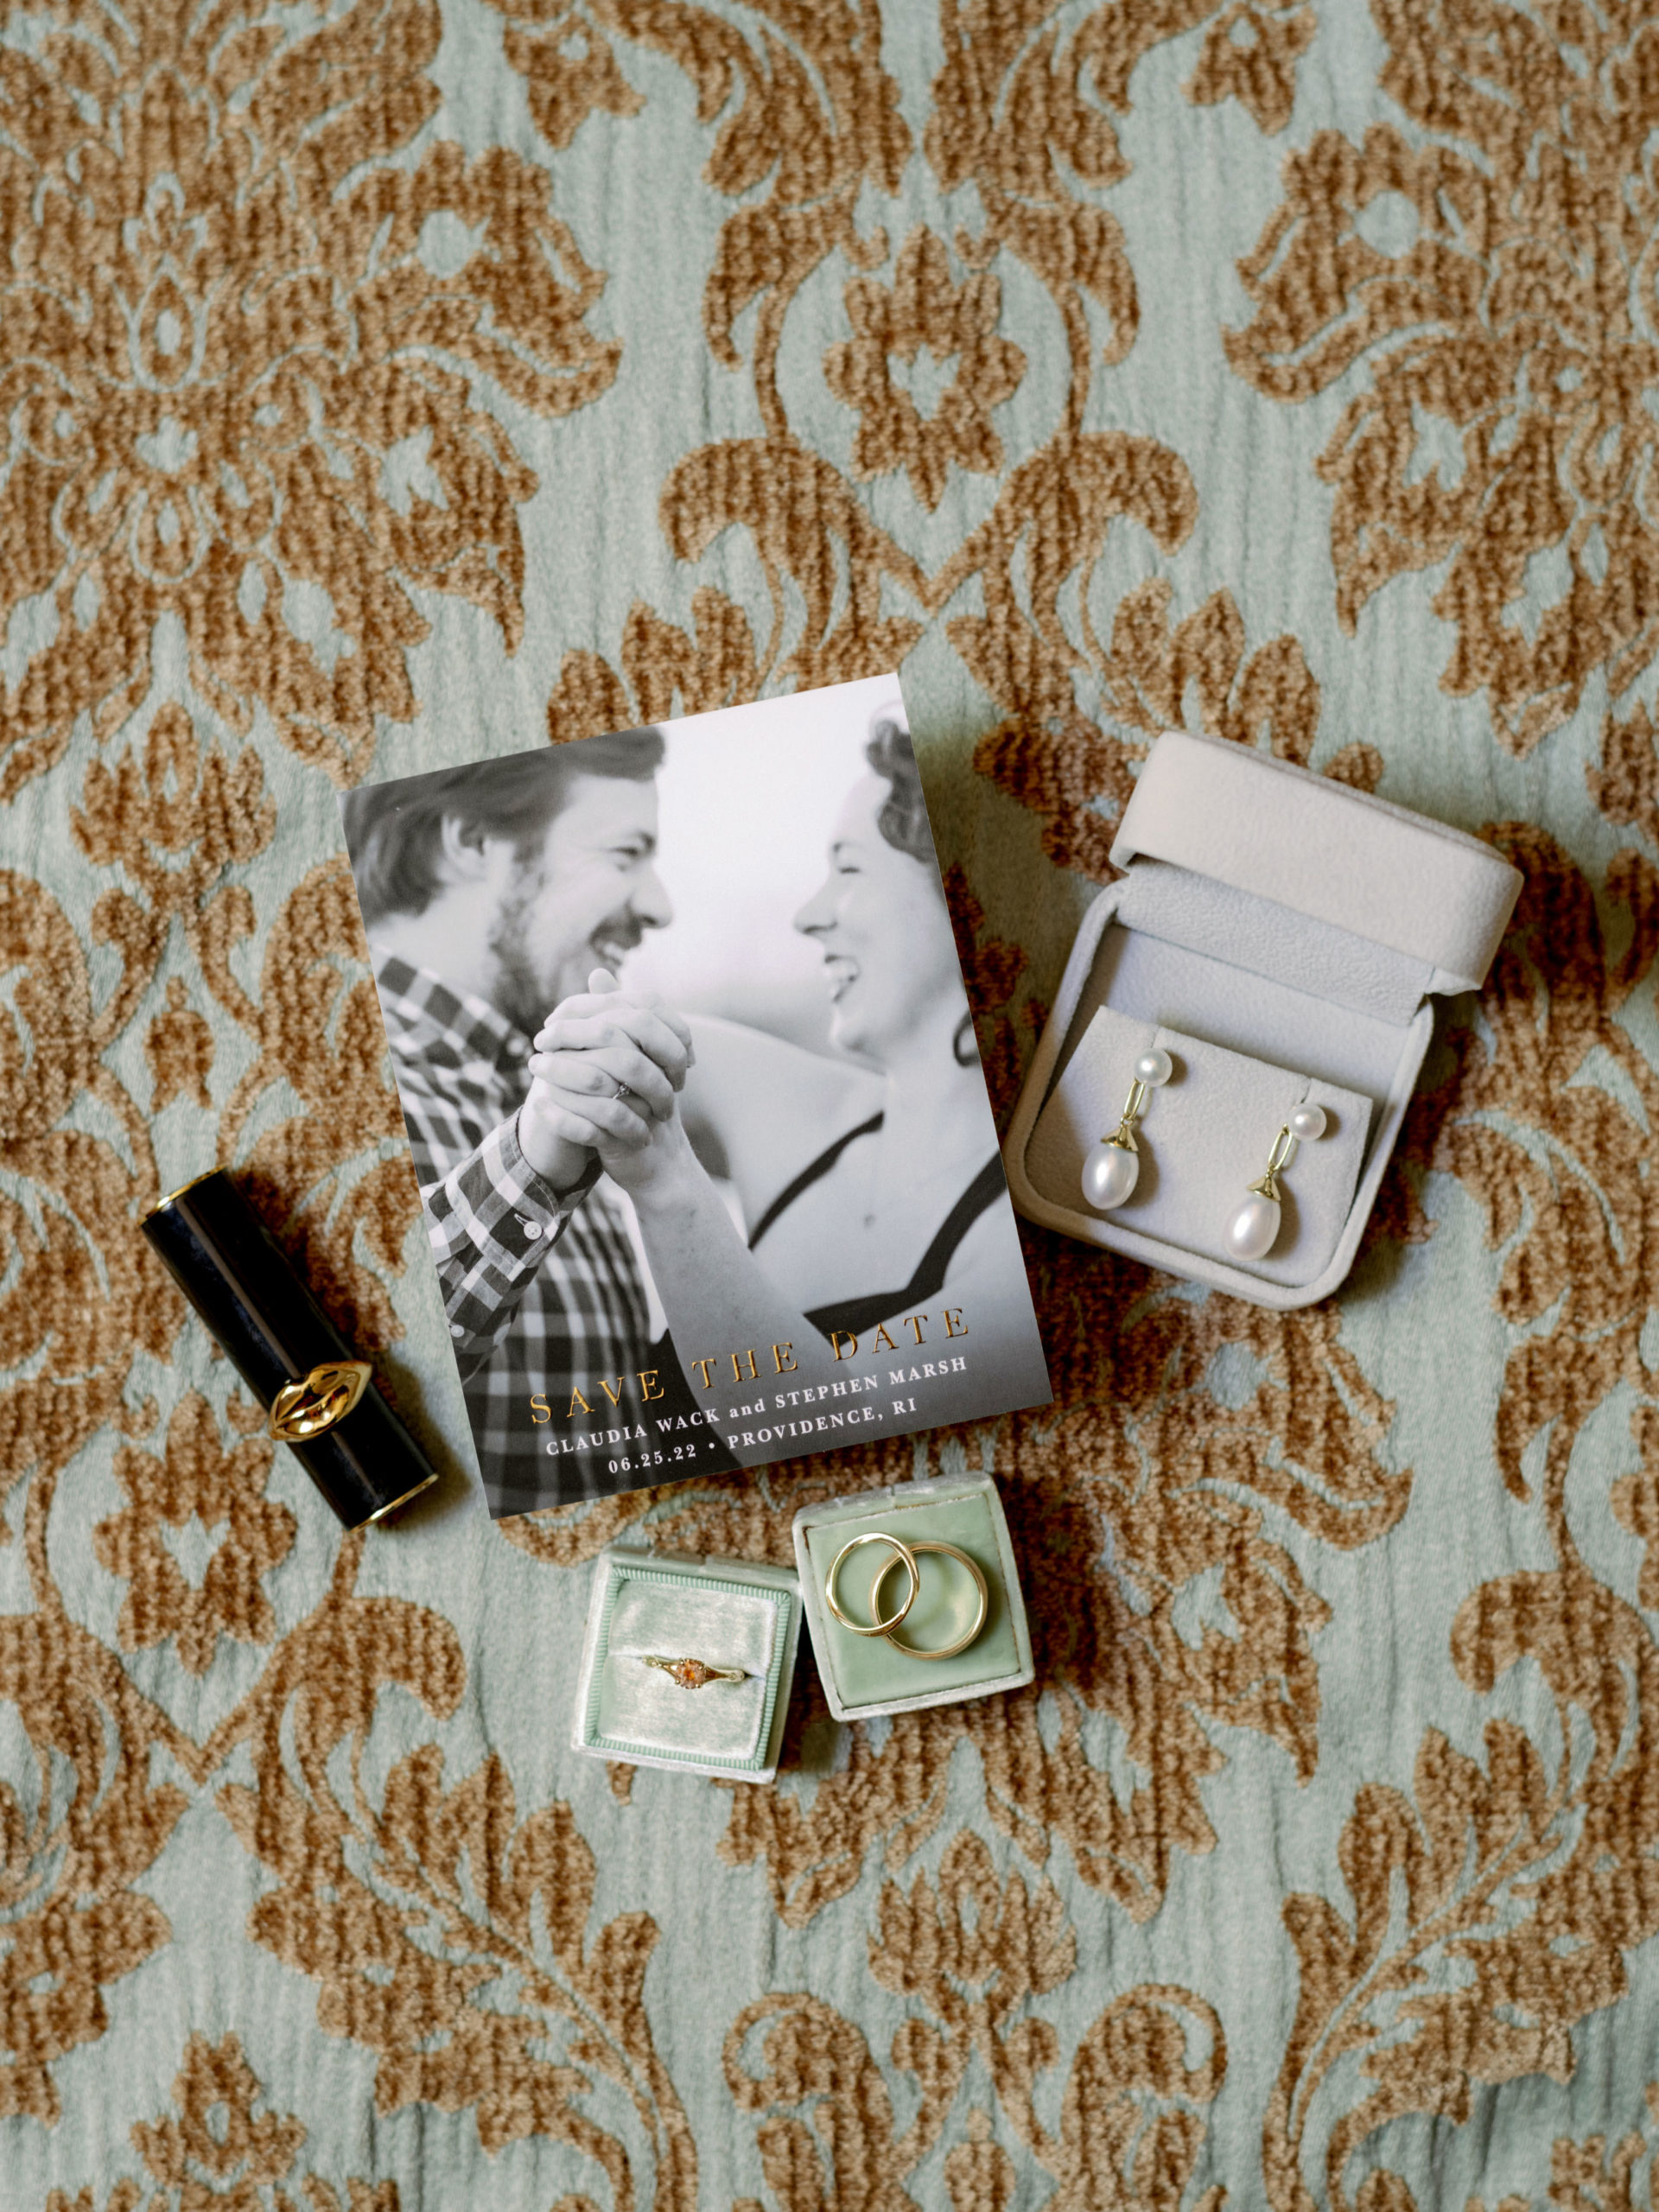 A save-the-date card with an engagement image printed on it, is placed on a table, together with wedding rings and accessories.